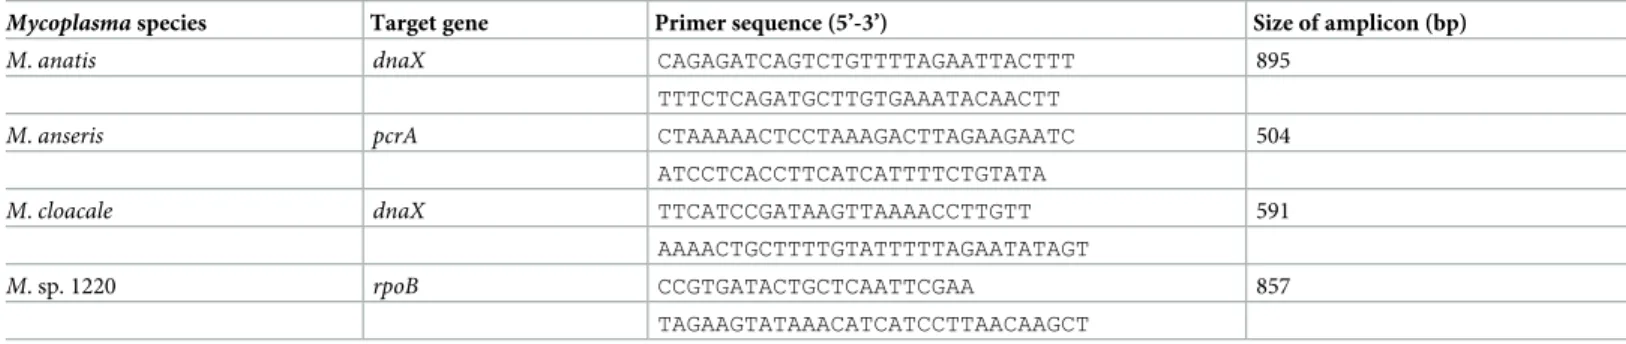 Table 3. Primers’ sequences and sizes of amplicons for the designed species-specific PCR assays.